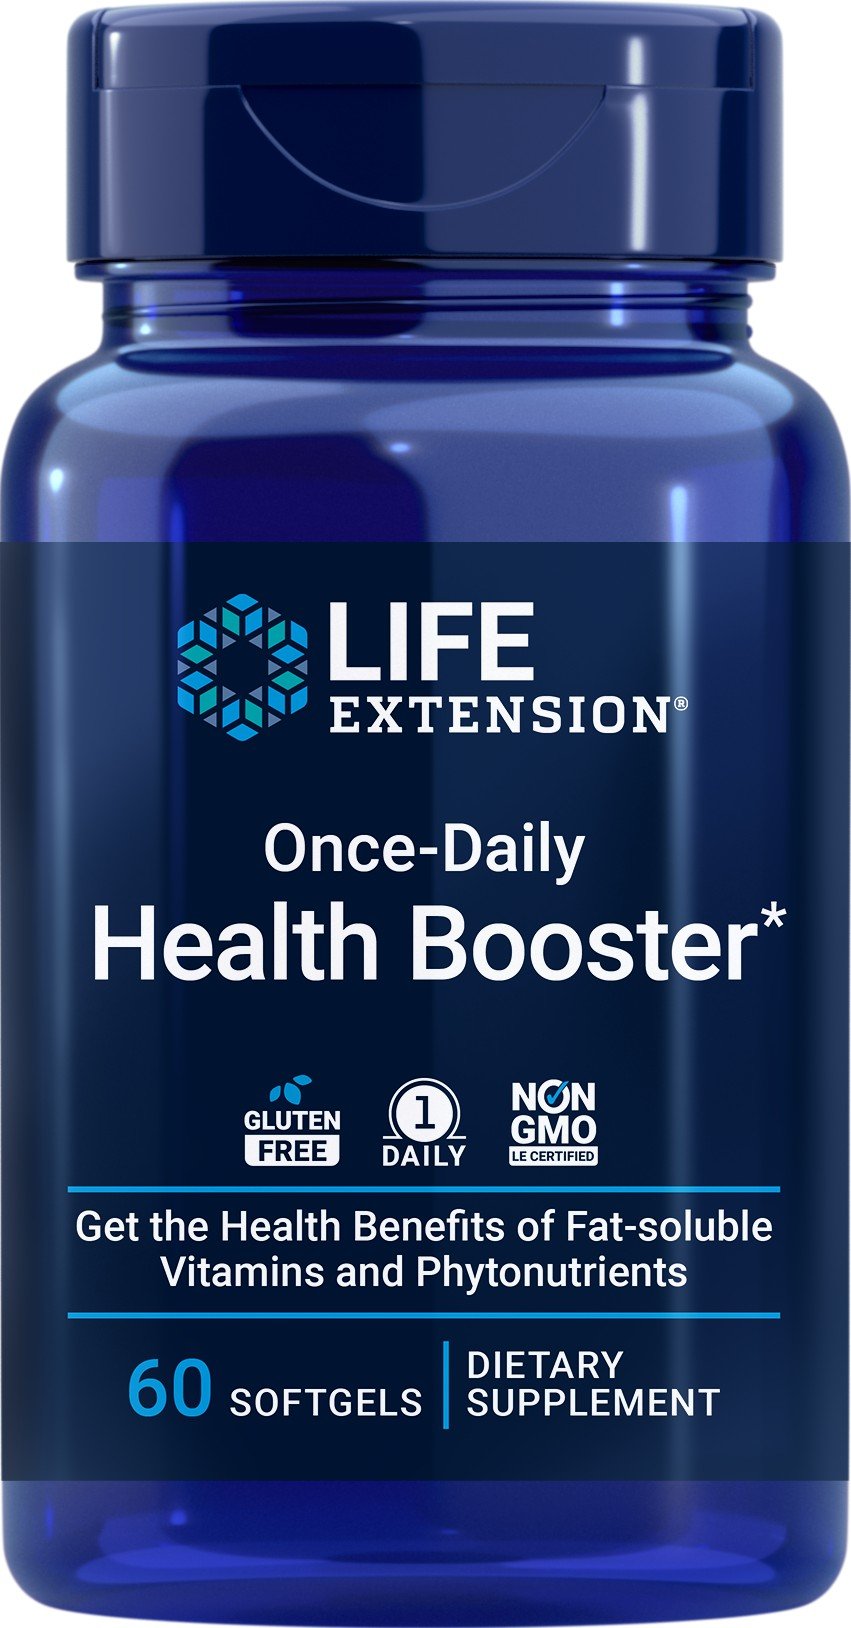 Life Extension Once-Daily Health Booster 60 Softgel